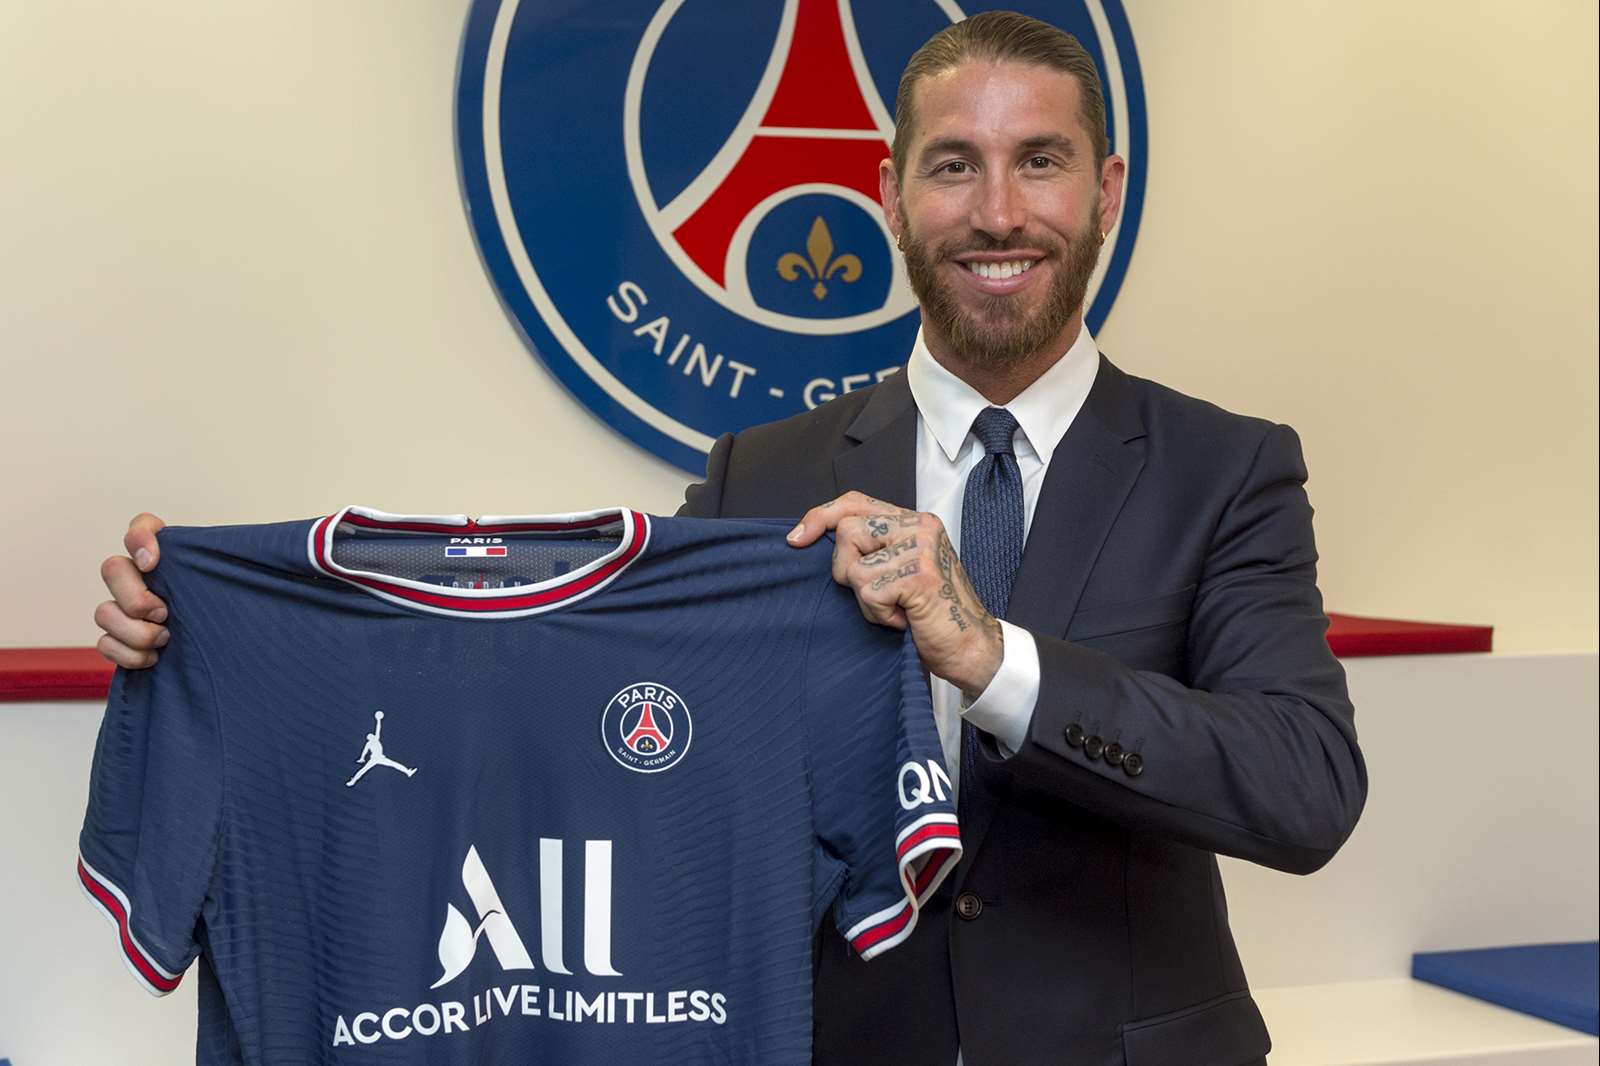 The Superteam gets its leader: Ramos officially signs for PSG